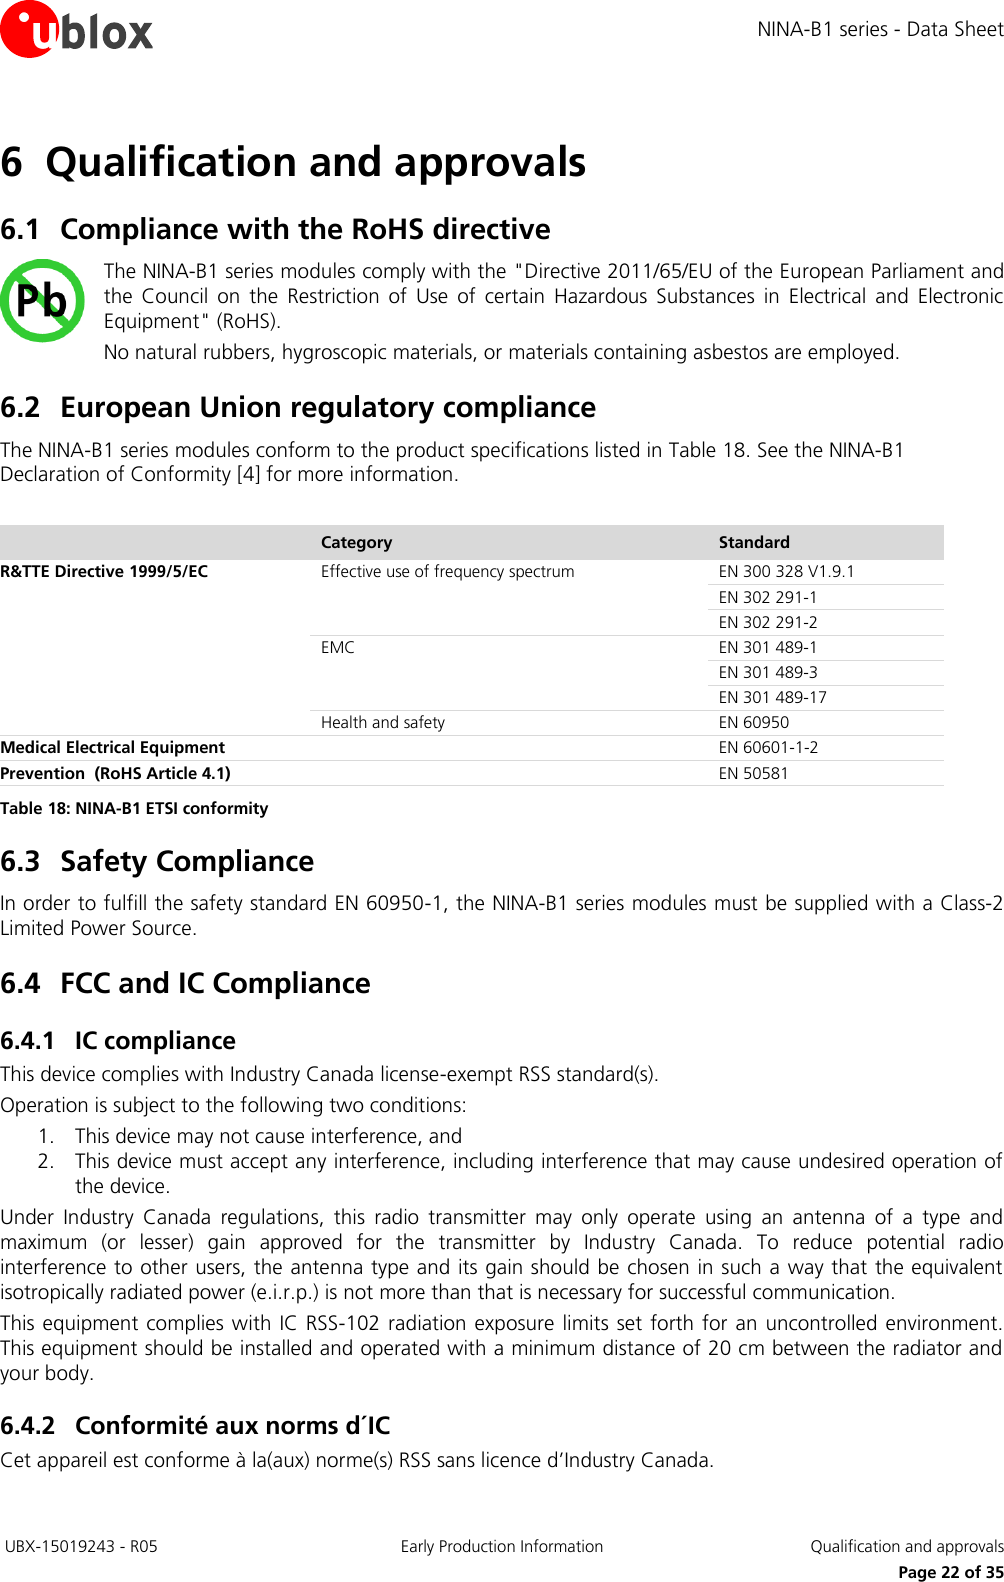 NINA-B1 series - Data Sheet  UBX-15019243 - R05 Early Production Information  Qualification and approvals     Page 22 of 35 6 Qualification and approvals 6.1 Compliance with the RoHS directive The NINA-B1 series modules comply with the &quot;Directive 2011/65/EU of the European Parliament and the  Council  on  the  Restriction  of  Use  of  certain  Hazardous  Substances  in  Electrical  and  Electronic Equipment&quot; (RoHS). No natural rubbers, hygroscopic materials, or materials containing asbestos are employed. 6.2 European Union regulatory compliance The NINA-B1 series modules conform to the product specifications listed in Table 18. See the NINA-B1 Declaration of Conformity [4] for more information.   Category Standard R&amp;TTE Directive 1999/5/EC Effective use of frequency spectrum EN 300 328 V1.9.1 EN 302 291-1 EN 302 291-2 EMC EN 301 489-1 EN 301 489-3 EN 301 489-17 Health and safety EN 60950 Medical Electrical Equipment  EN 60601-1-2 Prevention  (RoHS Article 4.1)  EN 50581 Table 18: NINA-B1 ETSI conformity 6.3 Safety Compliance In order to fulfill the safety standard EN 60950-1, the NINA-B1 series modules must be supplied with a Class-2 Limited Power Source. 6.4 FCC and IC Compliance 6.4.1 IC compliance This device complies with Industry Canada license-exempt RSS standard(s). Operation is subject to the following two conditions: 1. This device may not cause interference, and 2. This device must accept any interference, including interference that may cause undesired operation of the device. Under  Industry  Canada  regulations,  this  radio  transmitter  may  only  operate  using  an  antenna  of  a  type  and maximum  (or  lesser)  gain  approved  for  the  transmitter  by  Industry  Canada.  To  reduce  potential  radio interference to other users, the antenna type and its gain should be chosen in such a way that the equivalent isotropically radiated power (e.i.r.p.) is not more than that is necessary for successful communication. This equipment complies  with IC RSS-102 radiation exposure limits  set forth  for an uncontrolled environment. This equipment should be installed and operated with a minimum distance of 20 cm between the radiator and your body. 6.4.2 Conformité aux norms d´IC Cet appareil est conforme à la(aux) norme(s) RSS sans licence d’Industry Canada. 